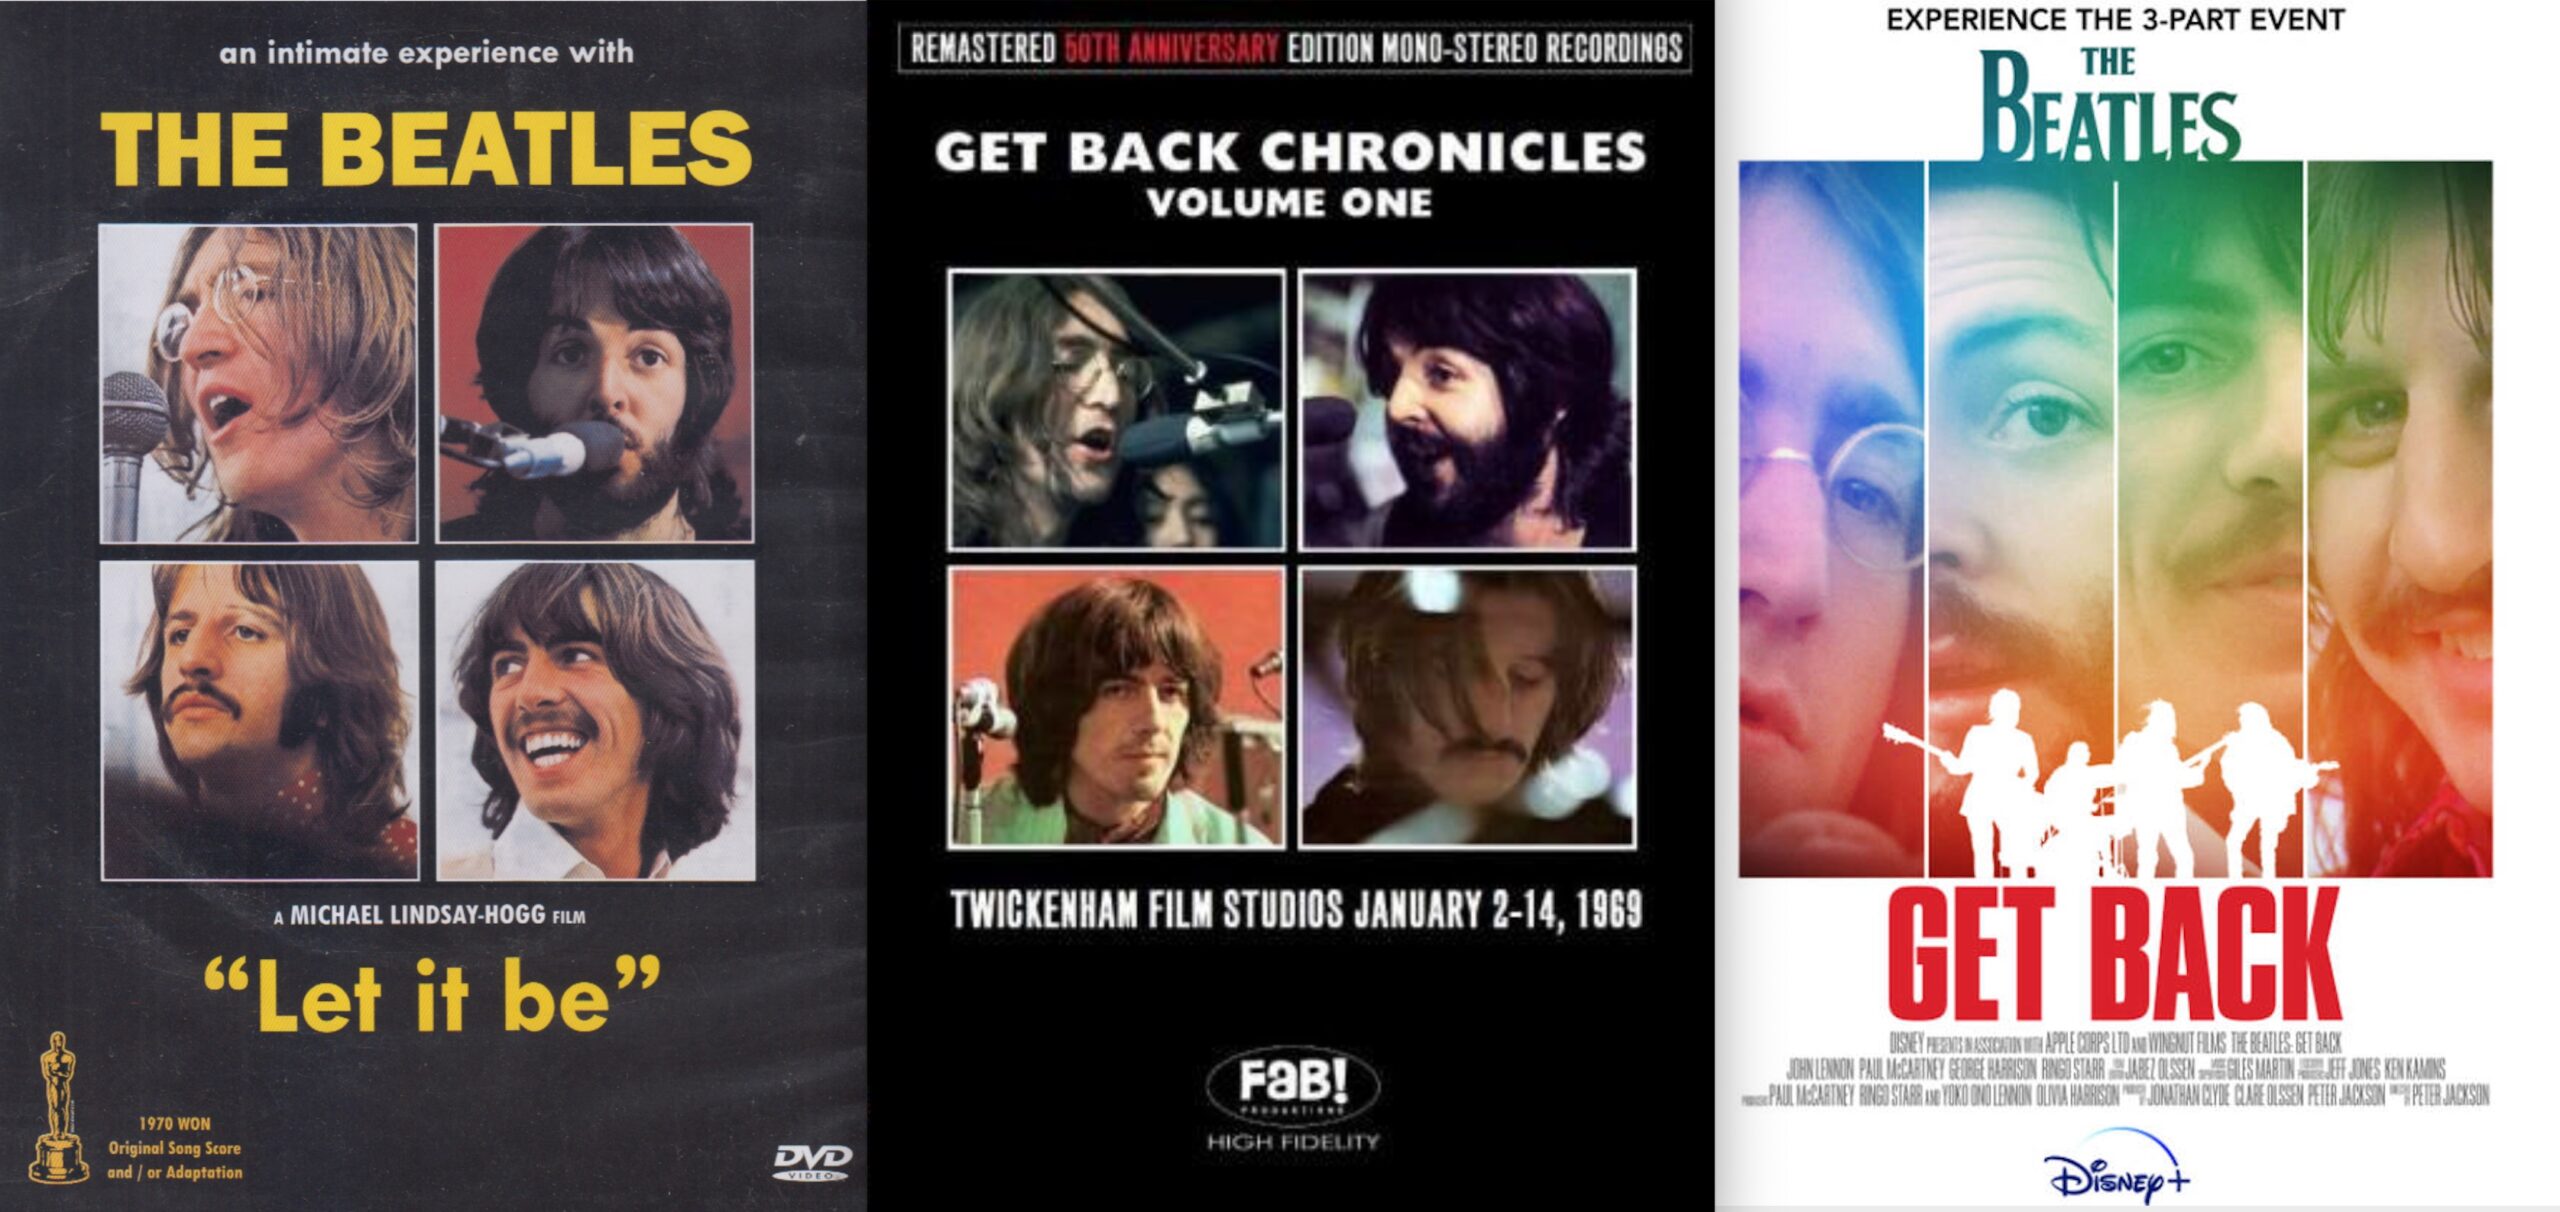 Third Times A Charm? The Latest Retelling Of The Beatles Farewell Movie, The Beatles: Get Back, Touches On Comparisons, Hits And Misses